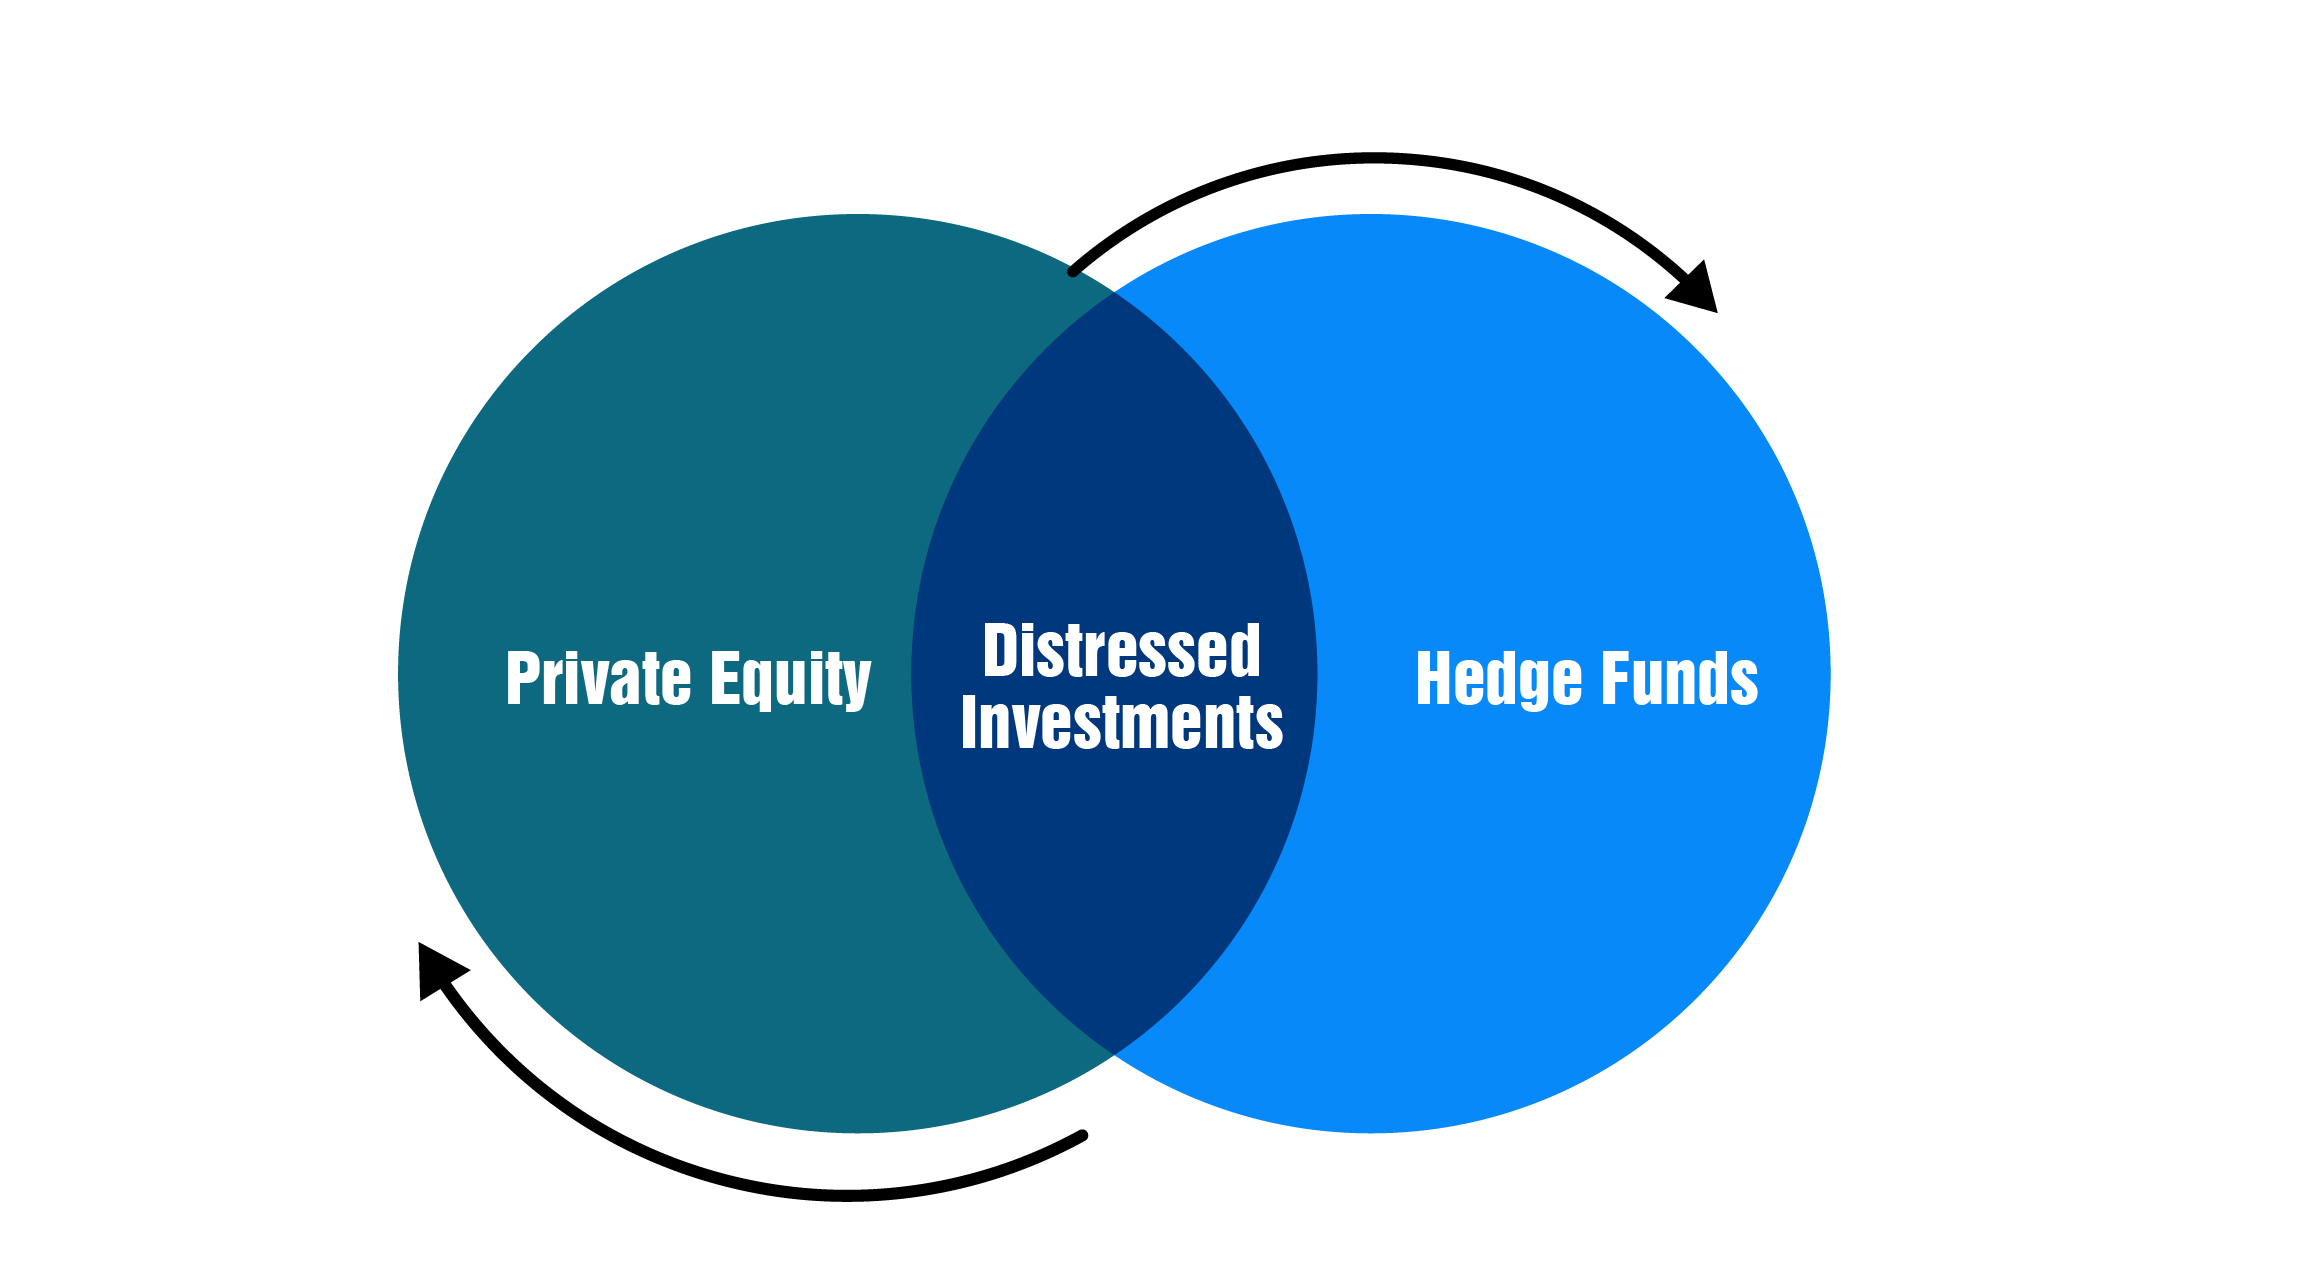 Distressed Investments